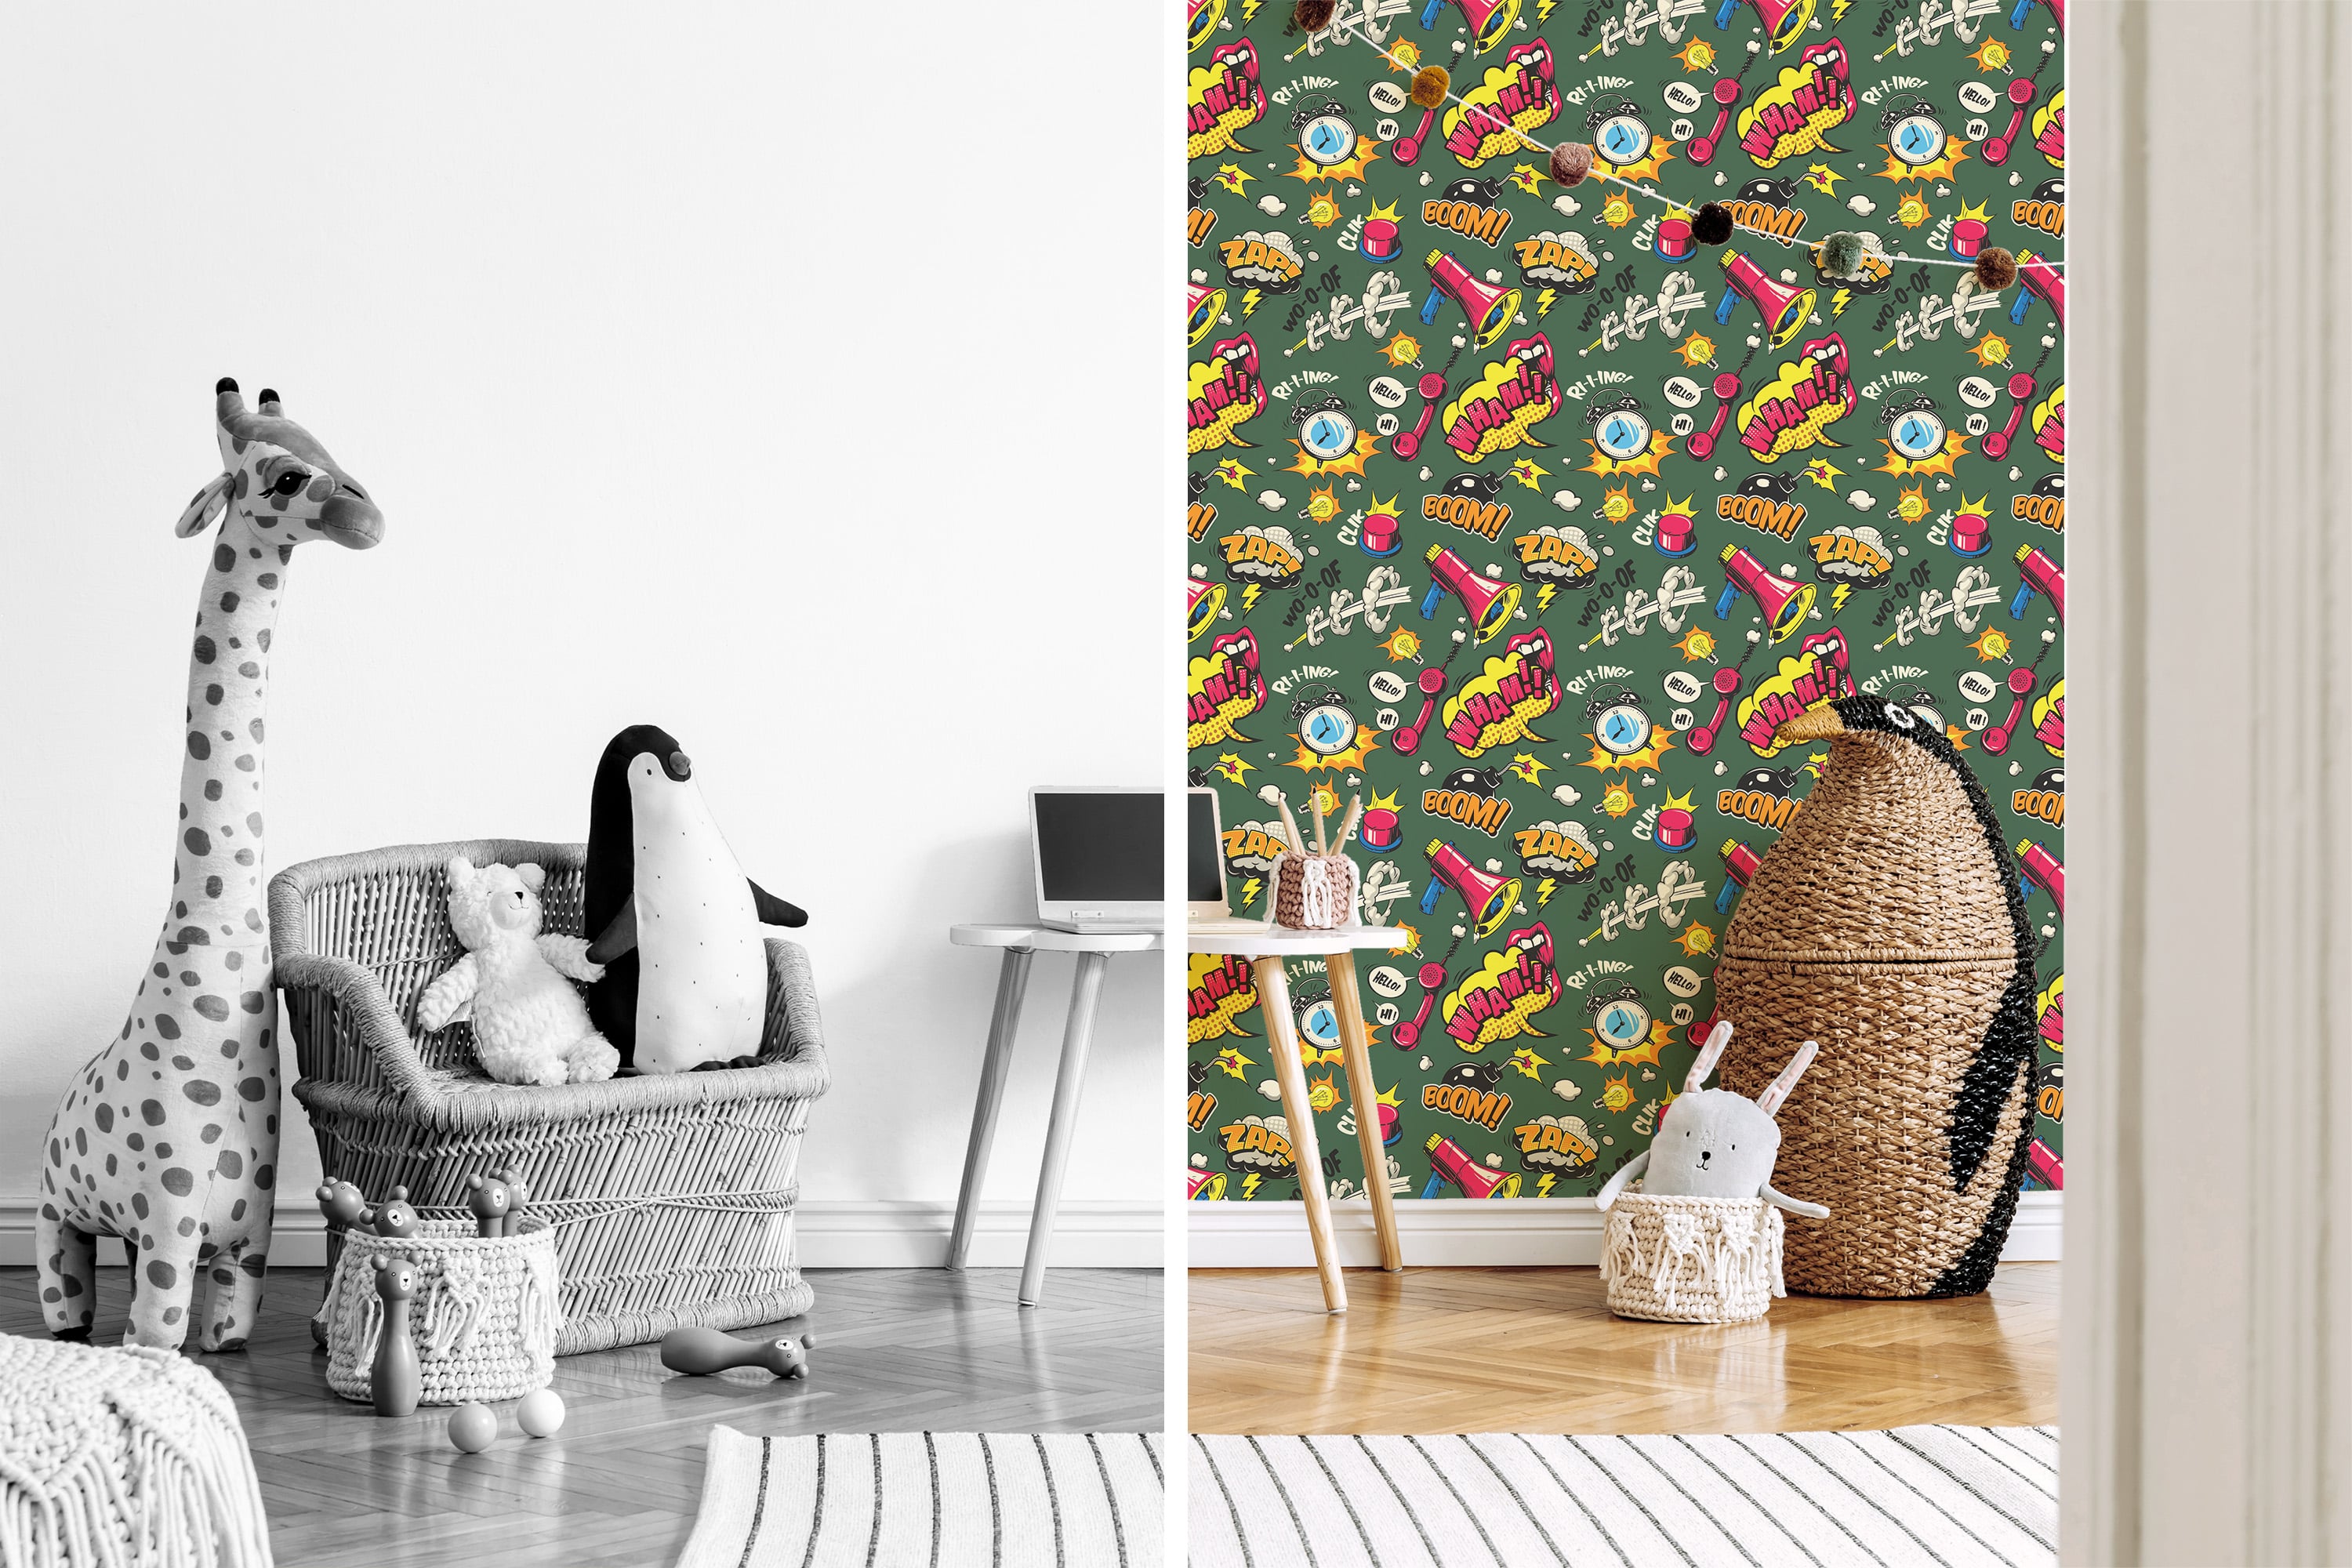 Pop art sticker wallpaper - Peel and Stick or Traditional